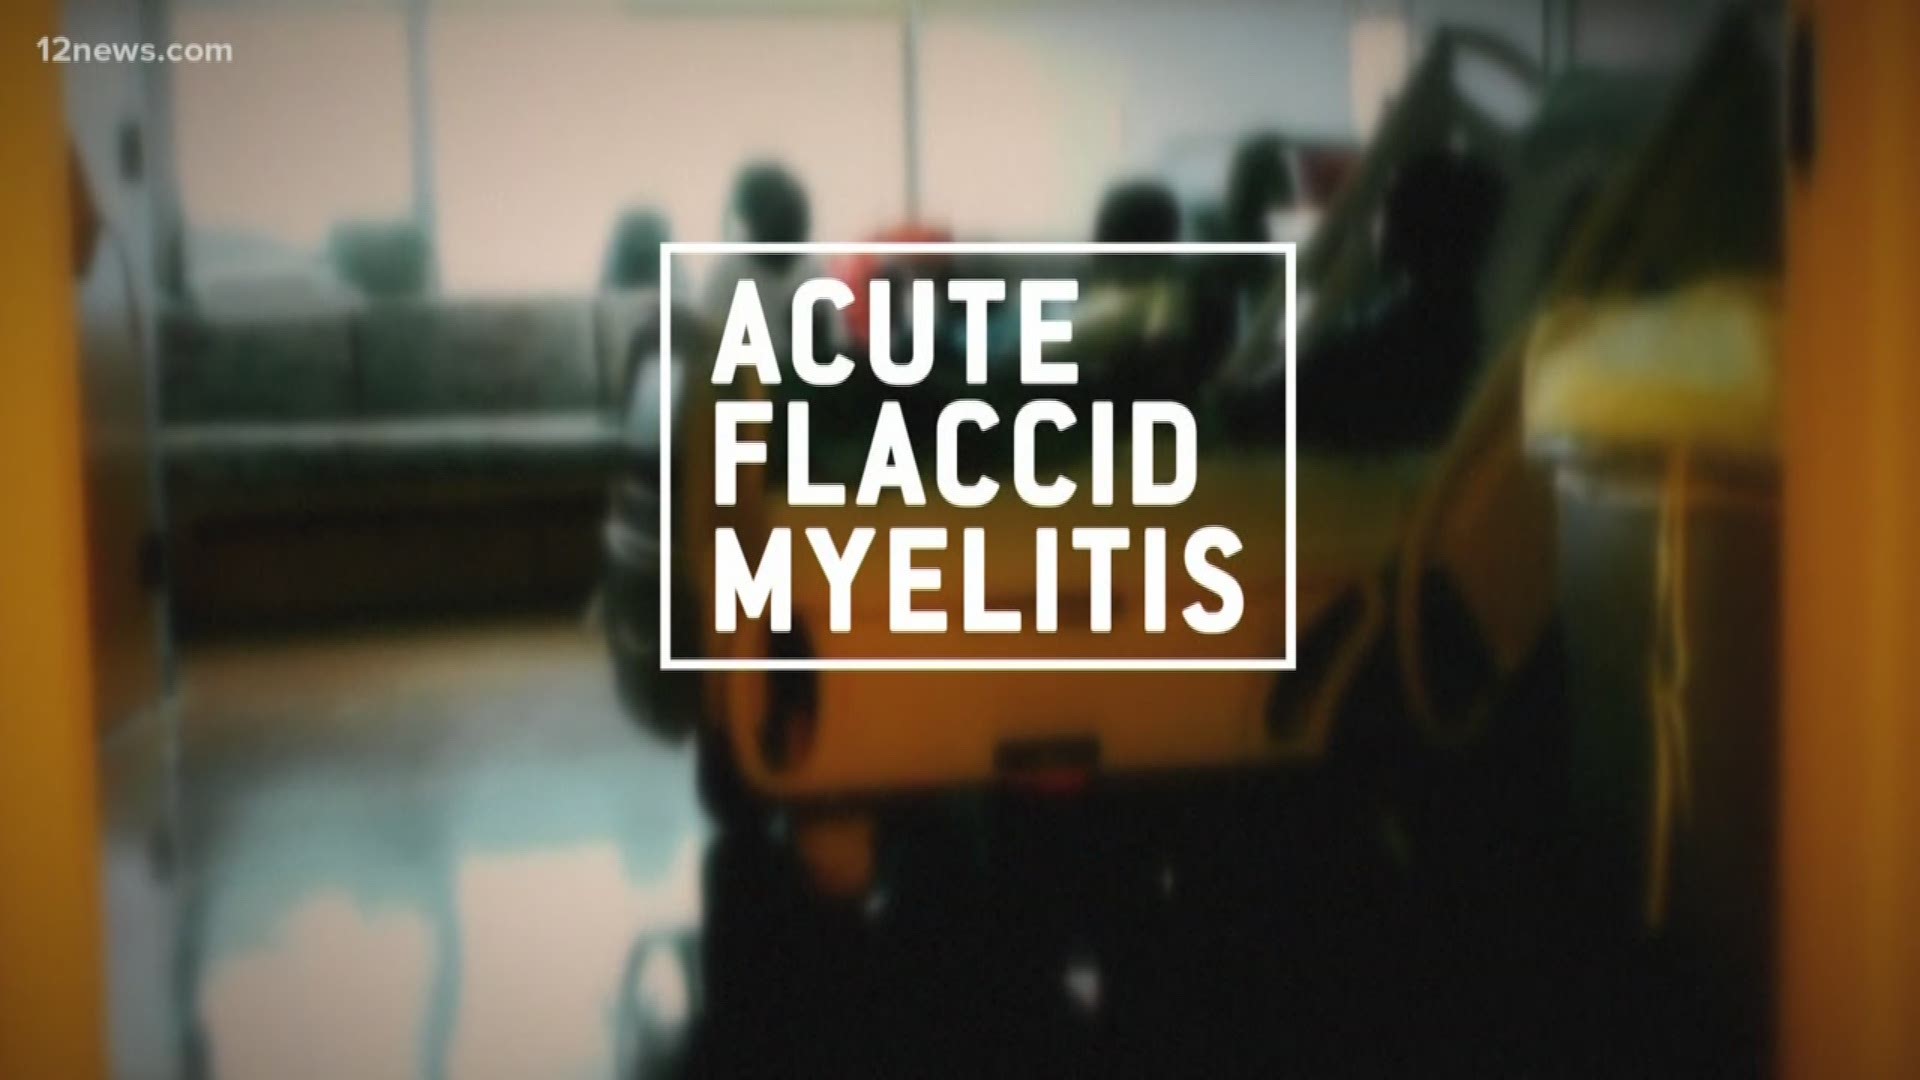 Acute flaccid myelitis has been popping up in several states. It affects a person's nervous system and can paralyze a child's arms and legs.